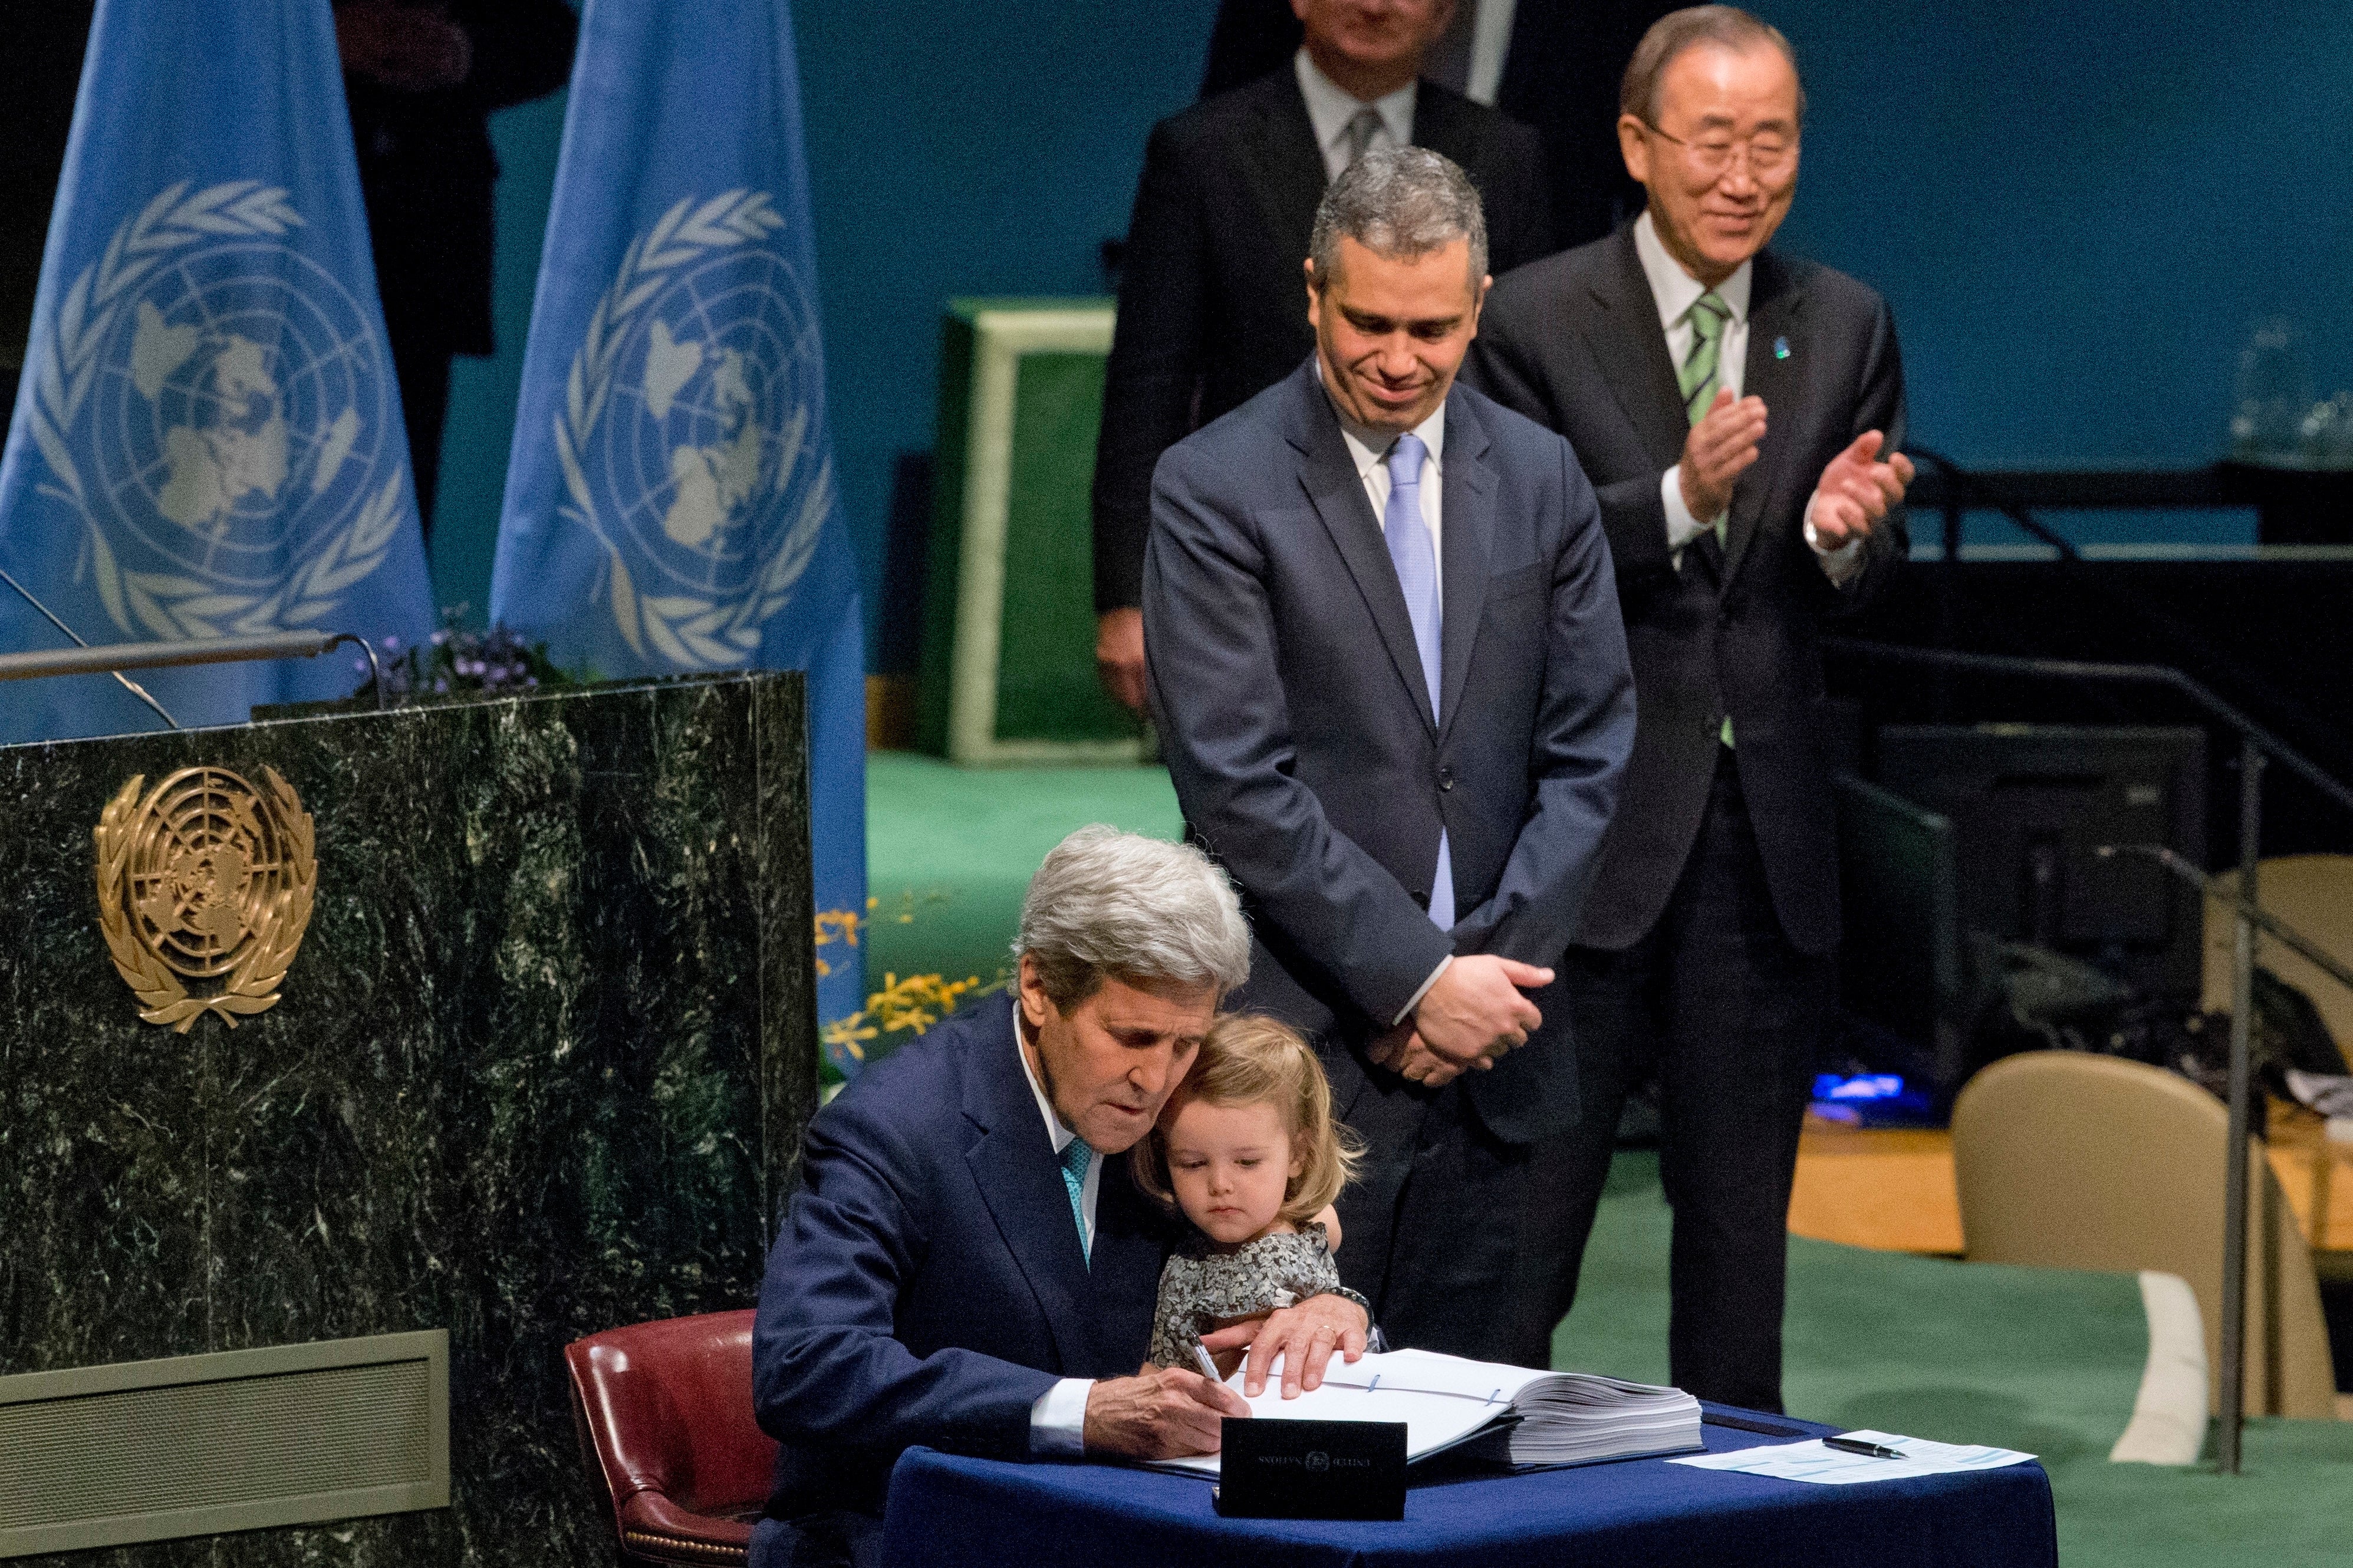 Secretary of State John Kerry holds his granddaughter as he signs the Paris Agreement on climate change, April 22, 2016 at U.N. headquarters